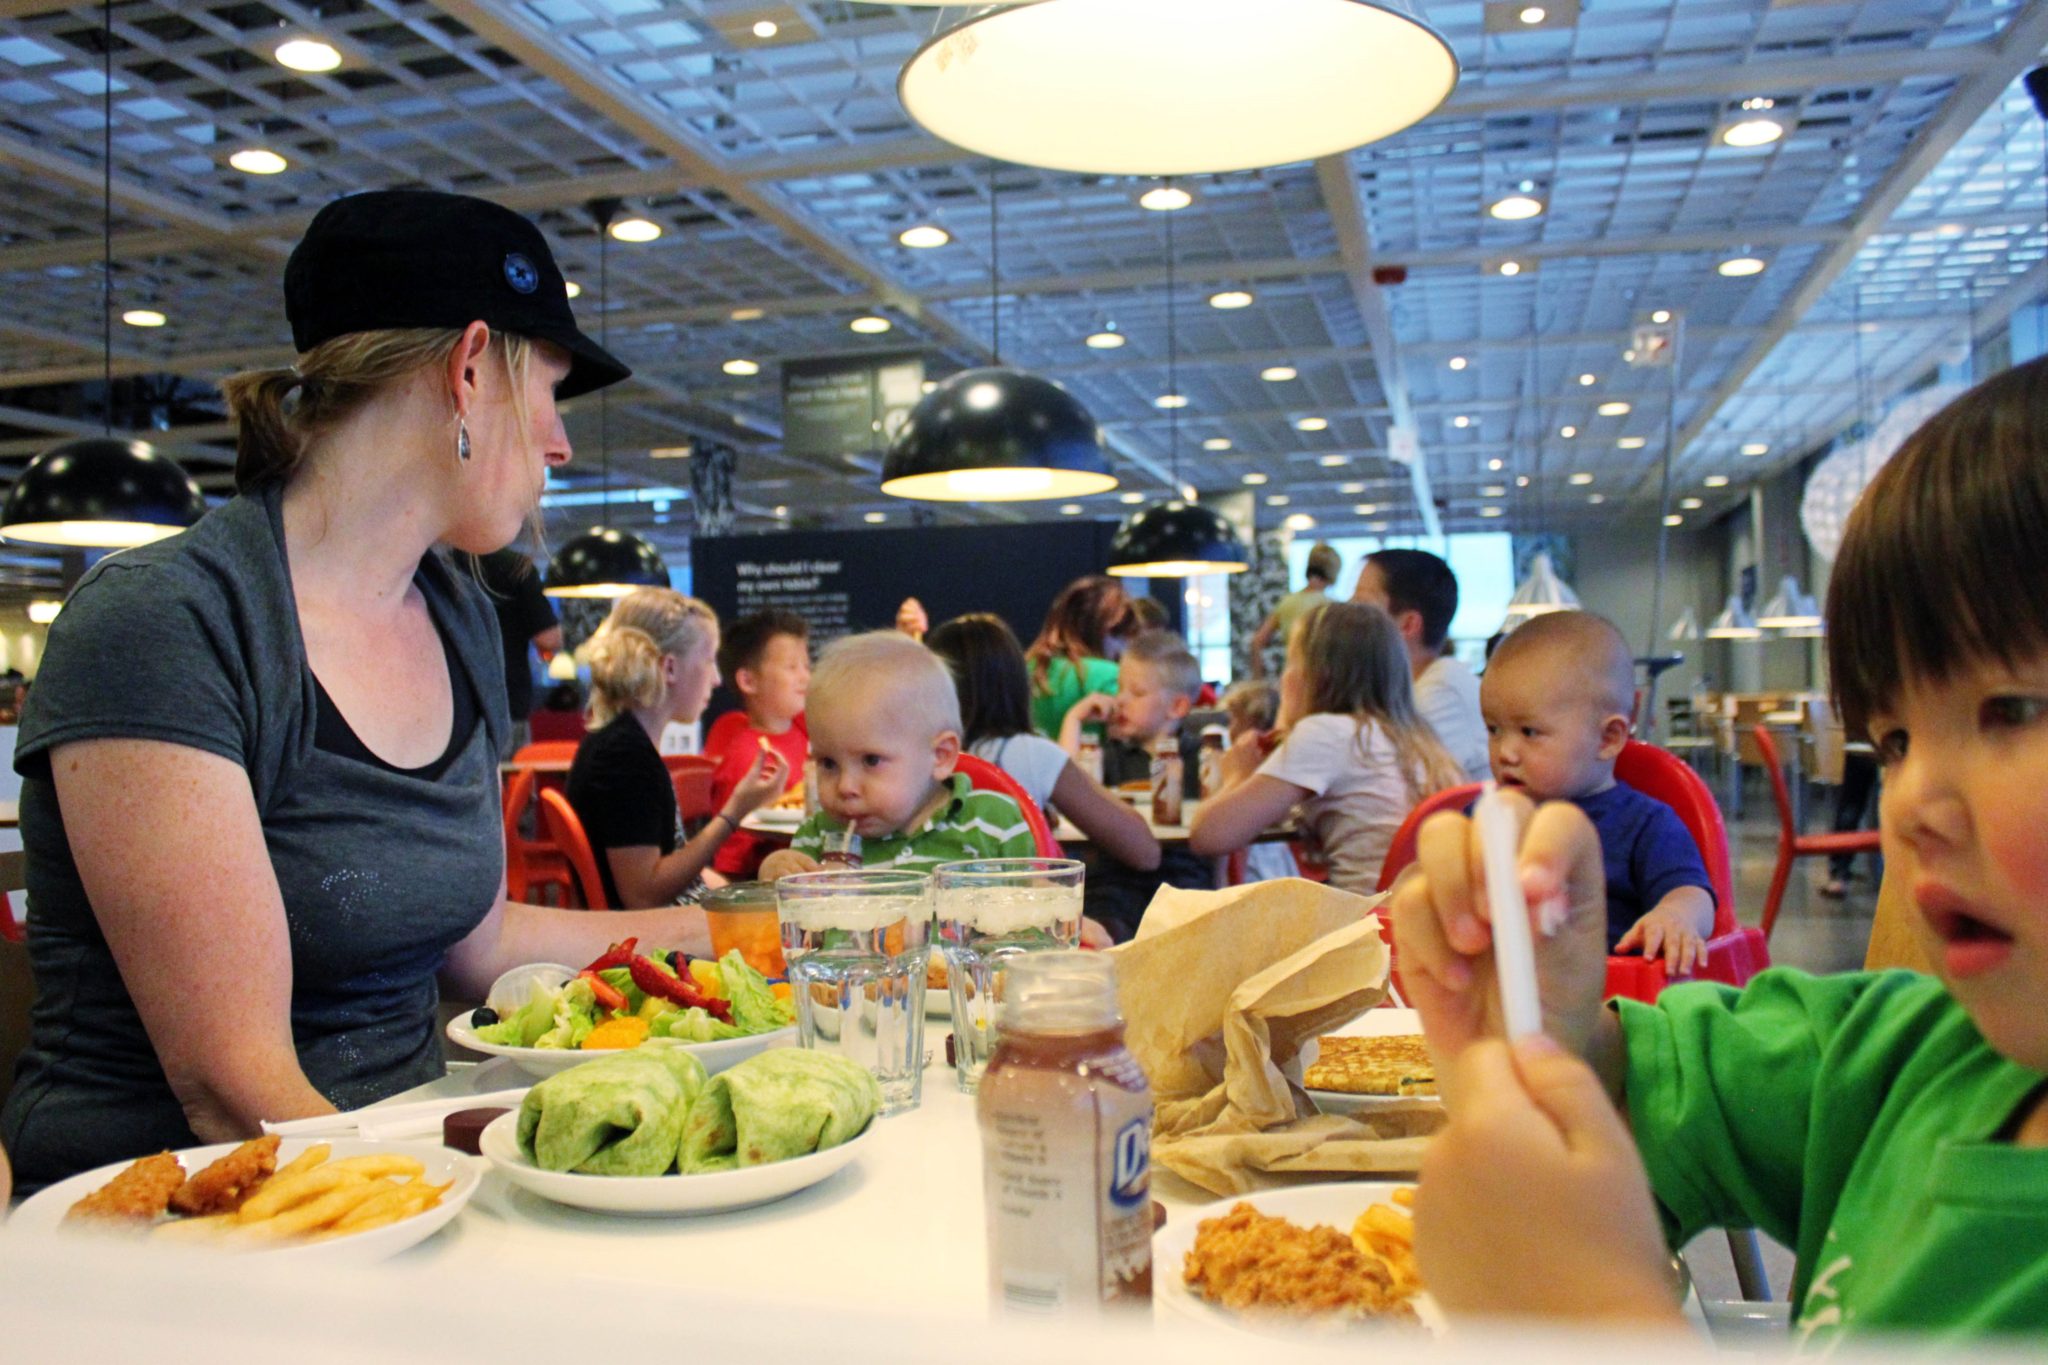 Did you know Ikea offers free kids meals every Tuesday-101 East Valley and Phoenix Kids activities #phoenix #arizona #ikea